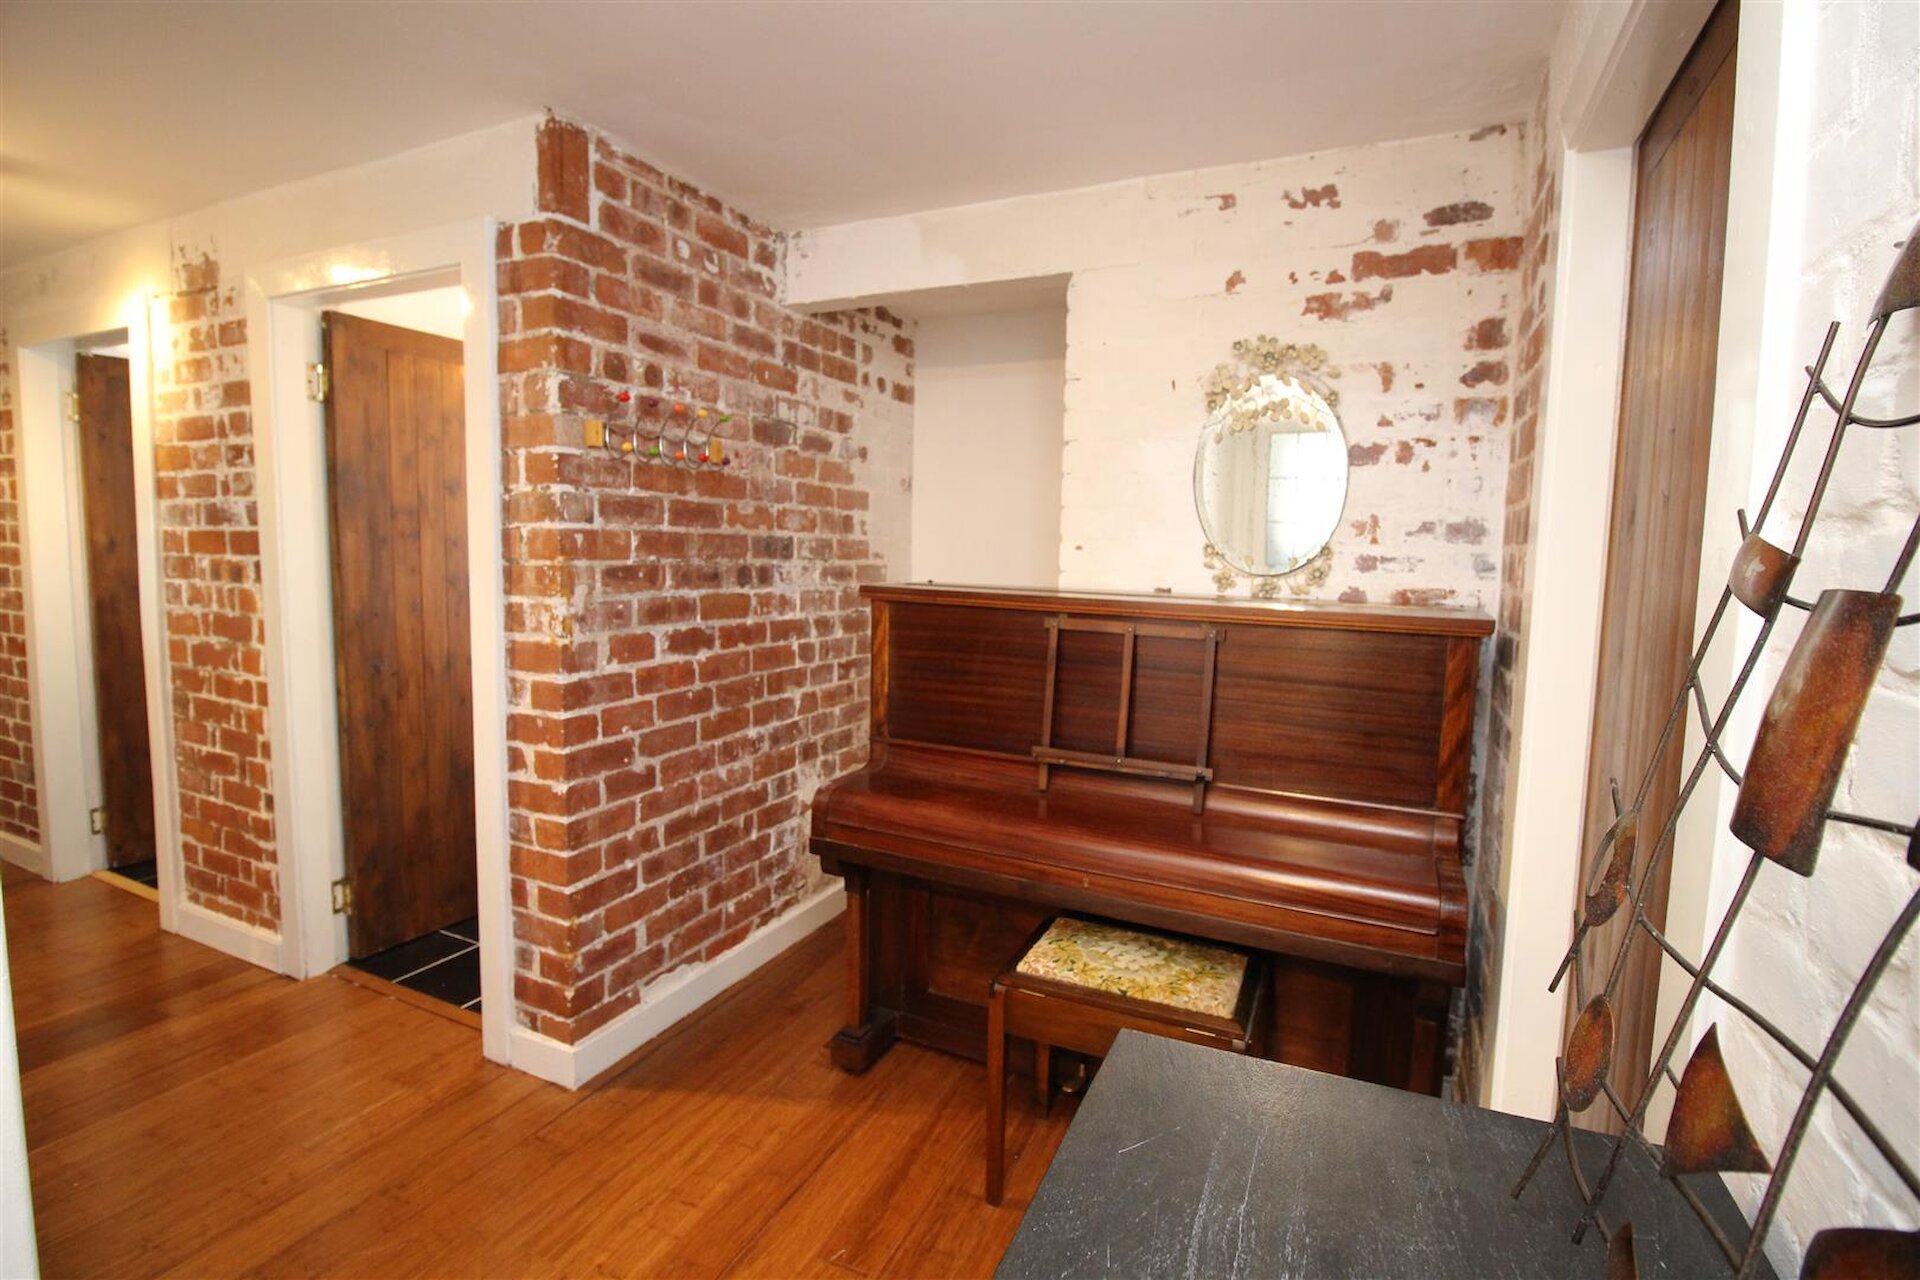 Exposed brick walls line the main hallway, leading into the lounge and bedrooms. 